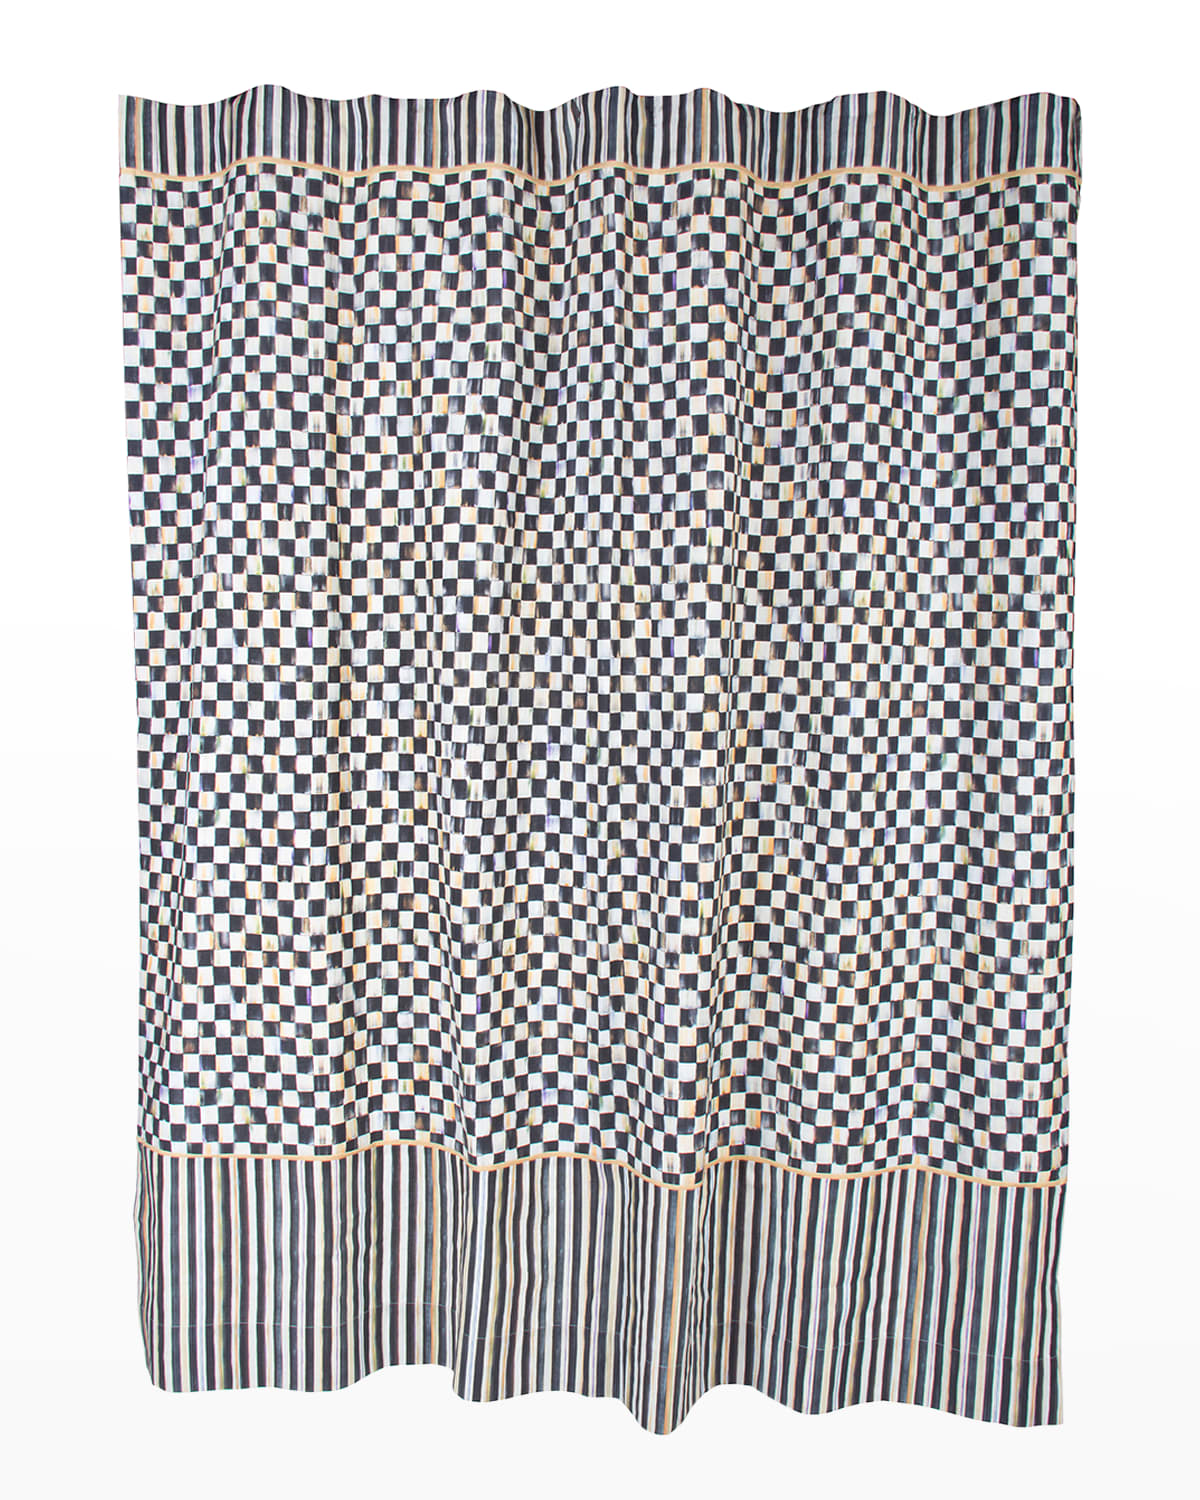 Shop Mackenzie-childs Courtly Check Shower Curtain In Black